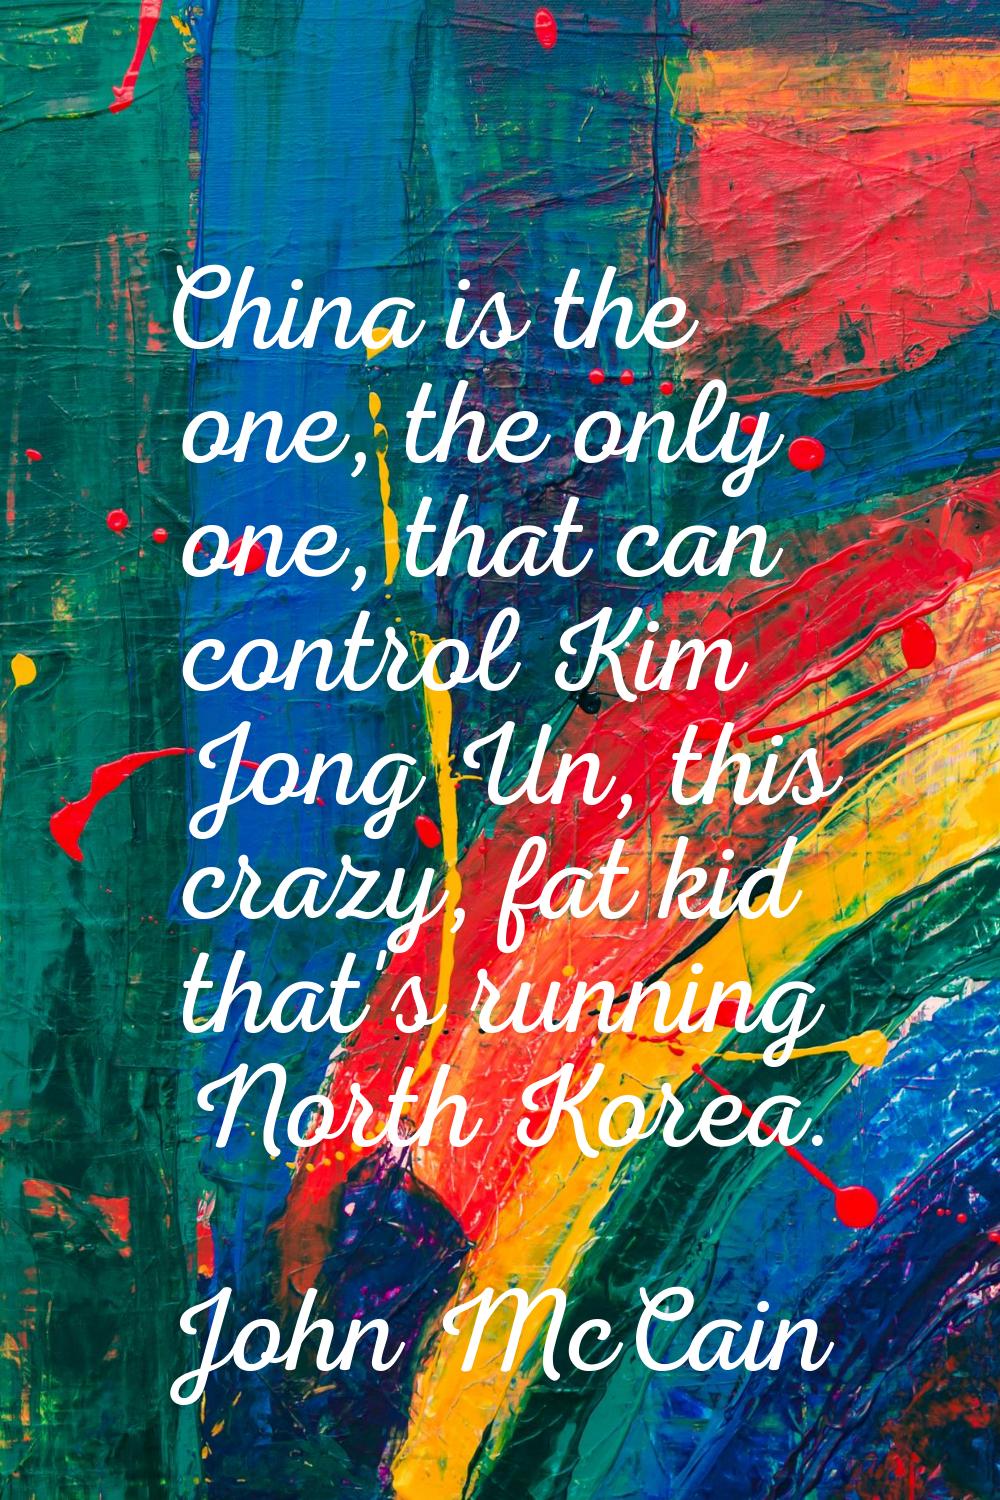 China is the one, the only one, that can control Kim Jong Un, this crazy, fat kid that's running No